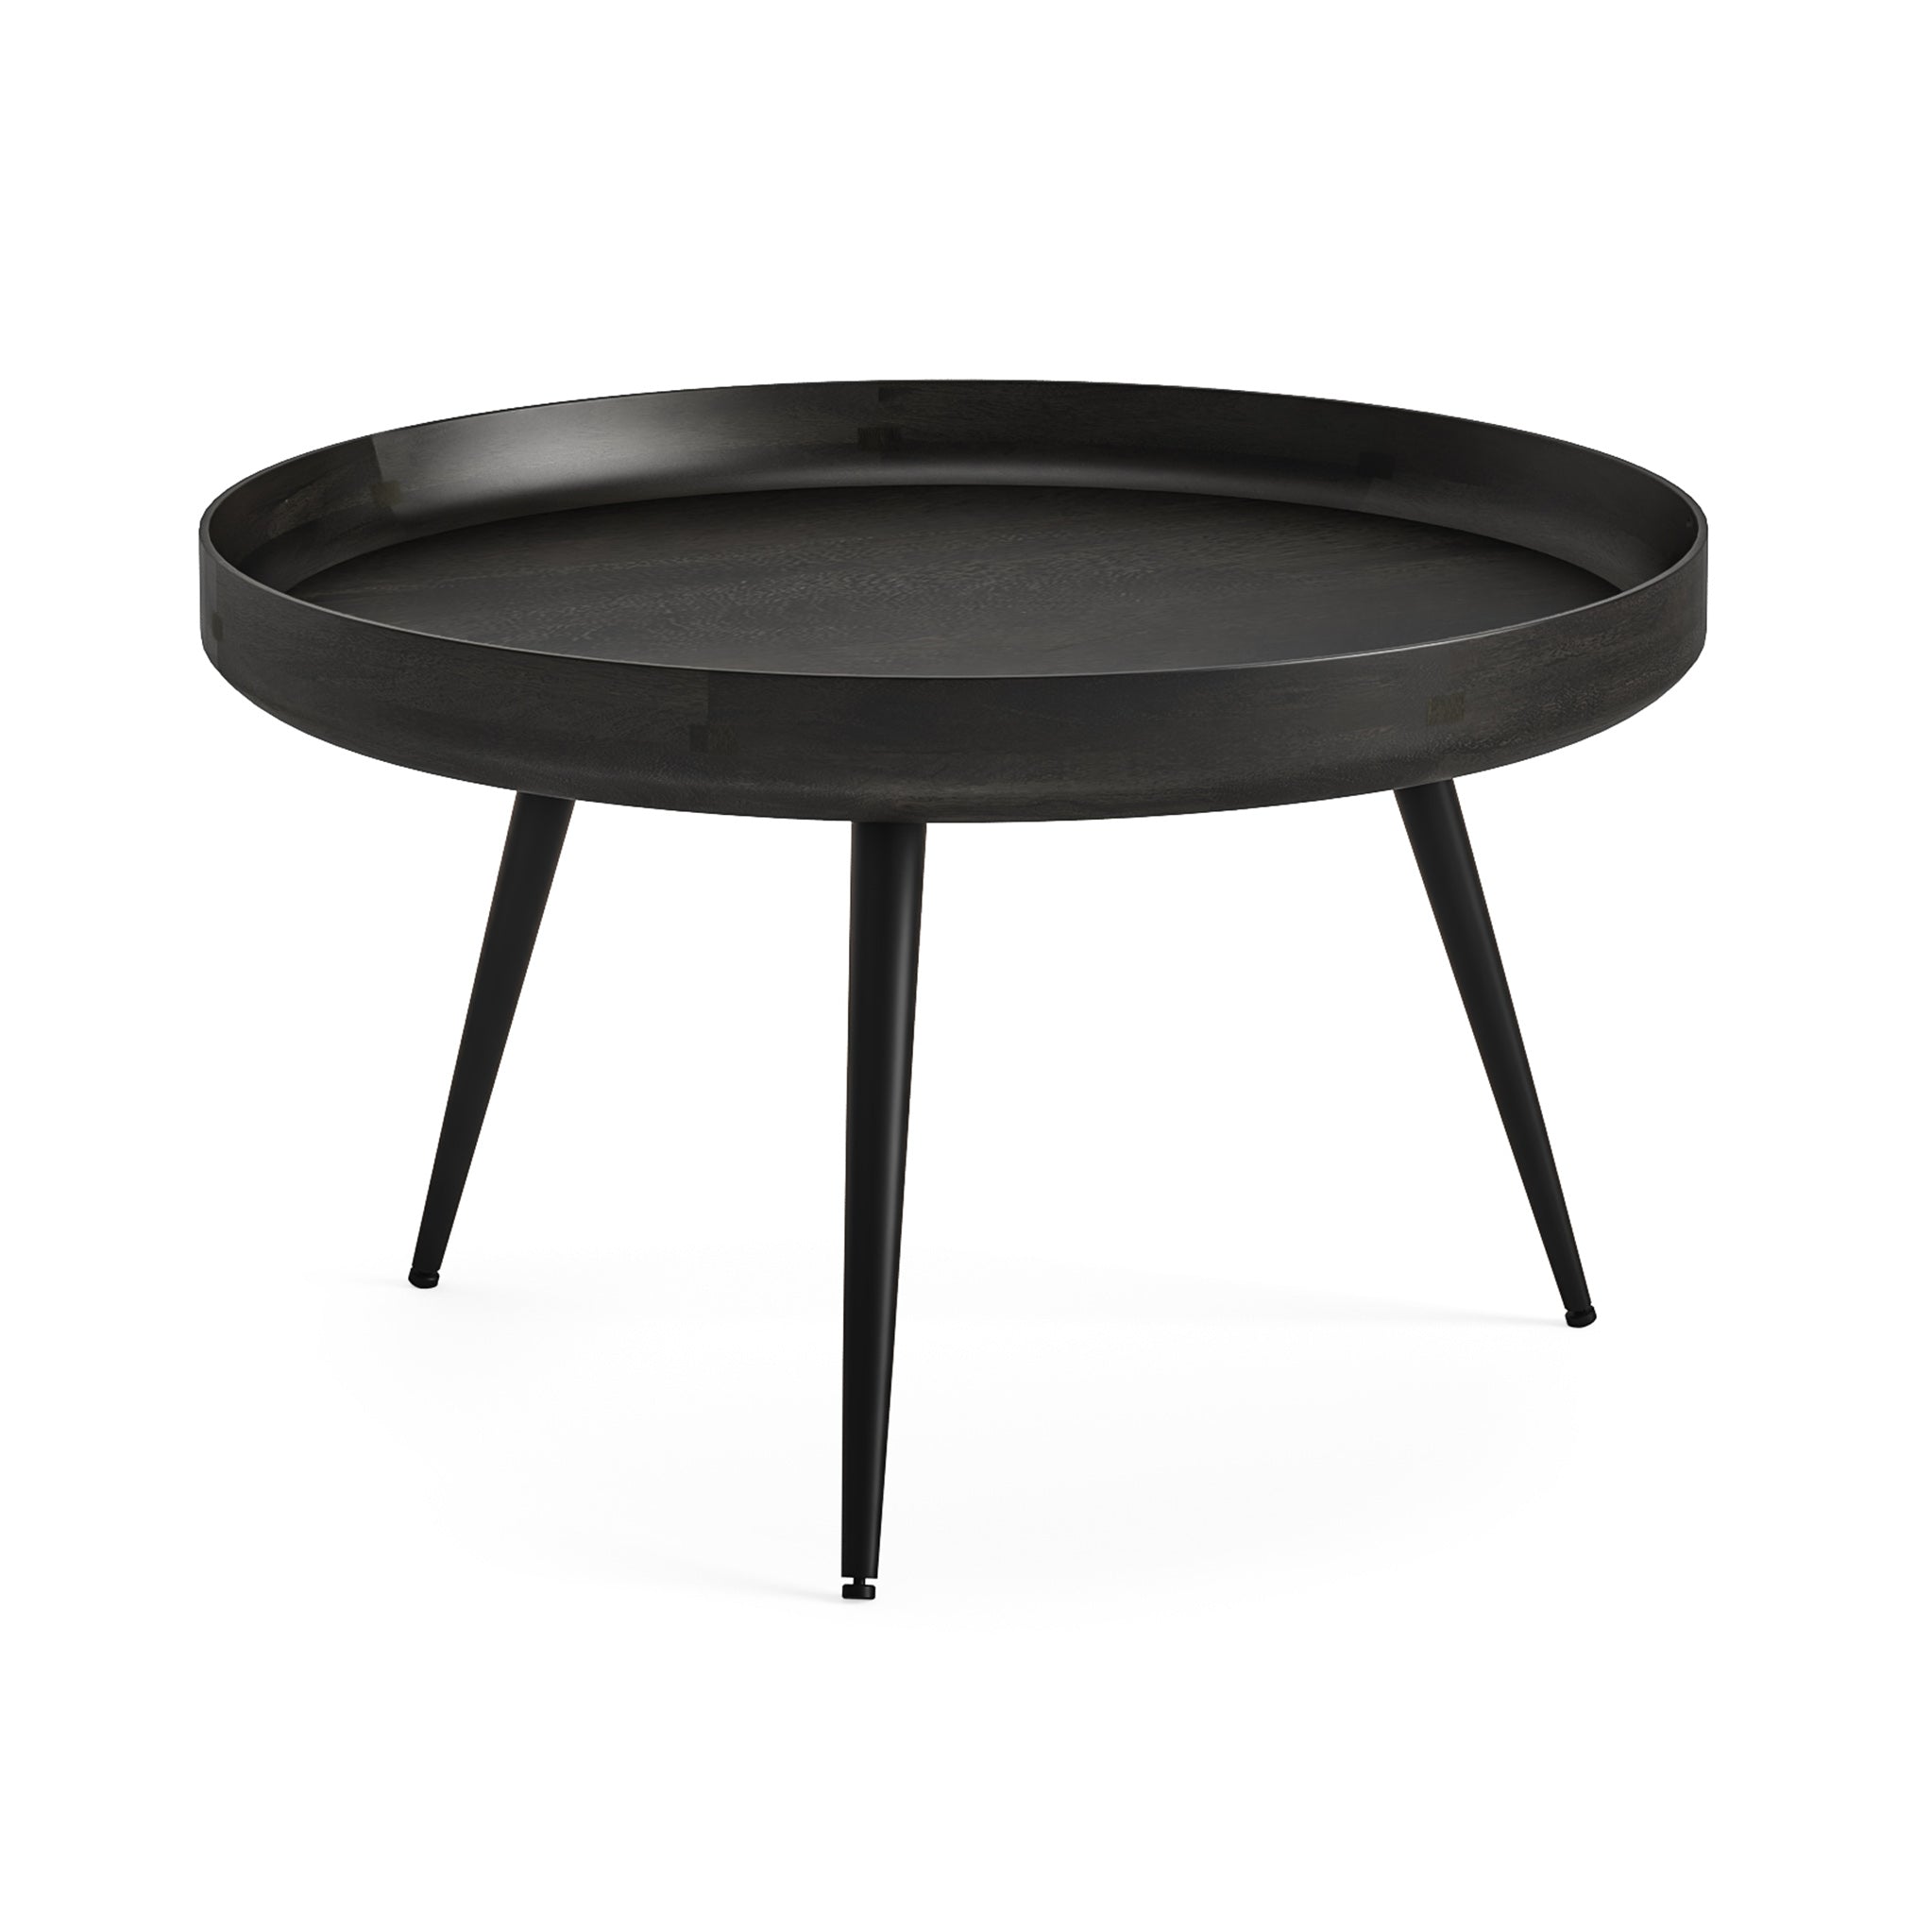 Boa Mango Wooden 80cm Round Coffee Table Natural Or Black